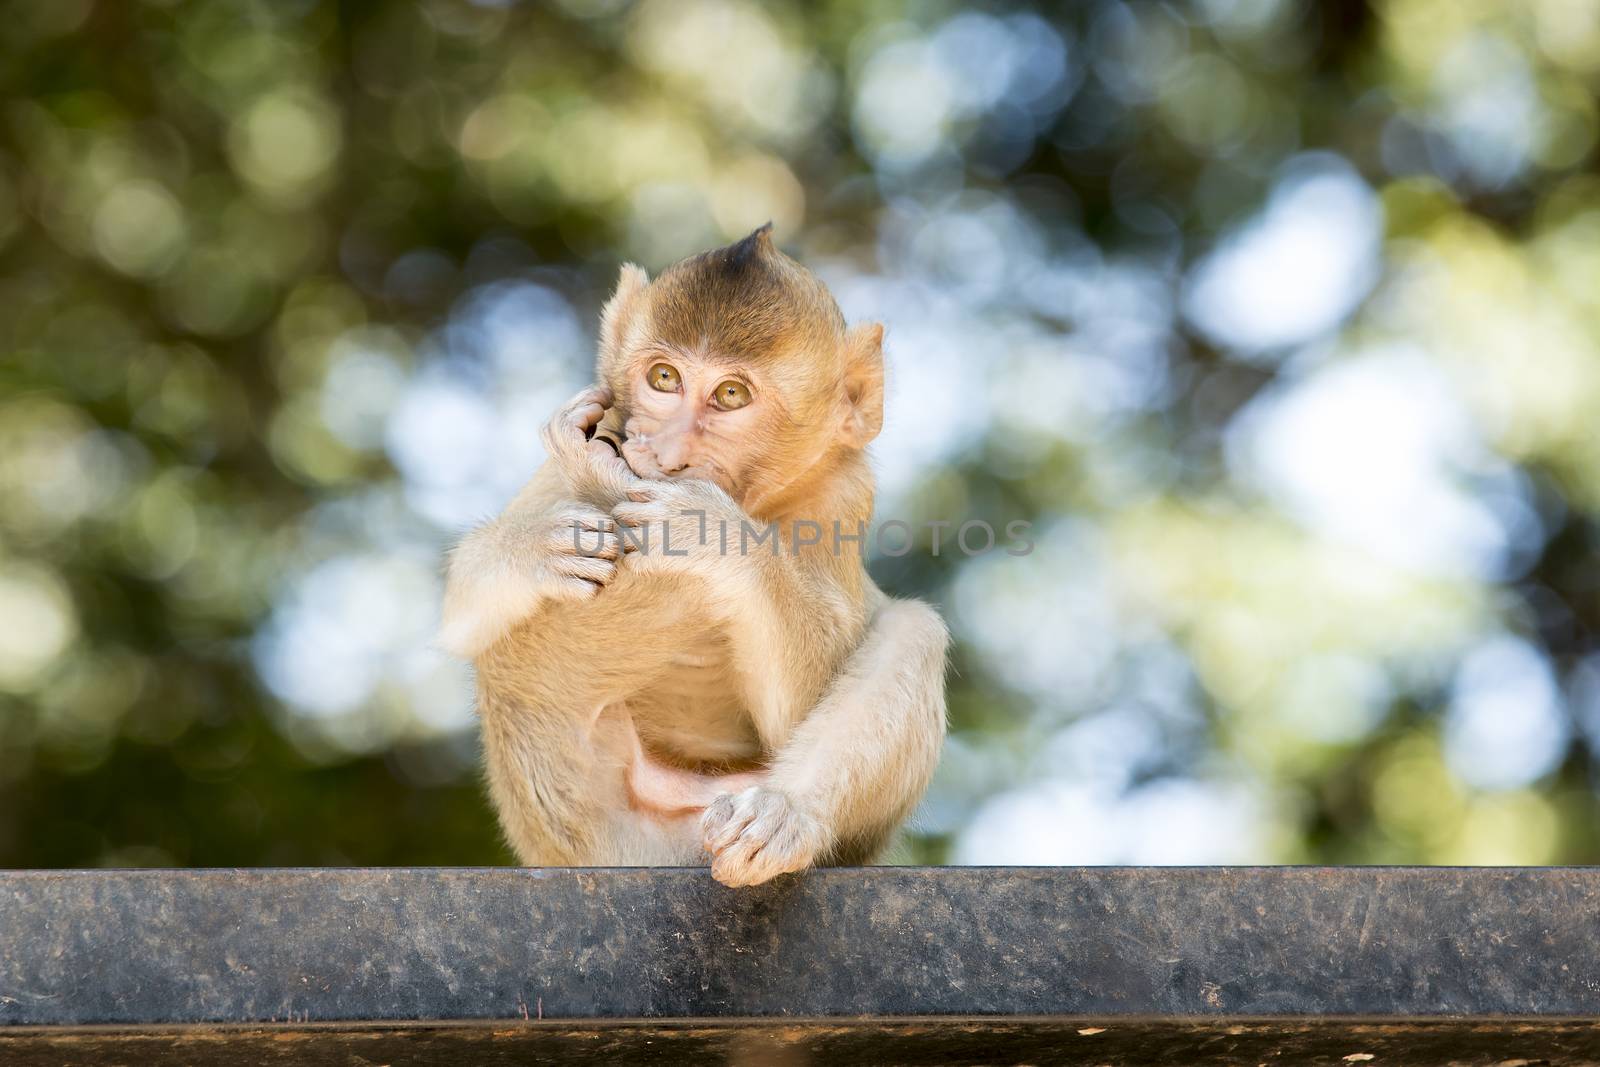 Baby Monkey sit and out of focus background.